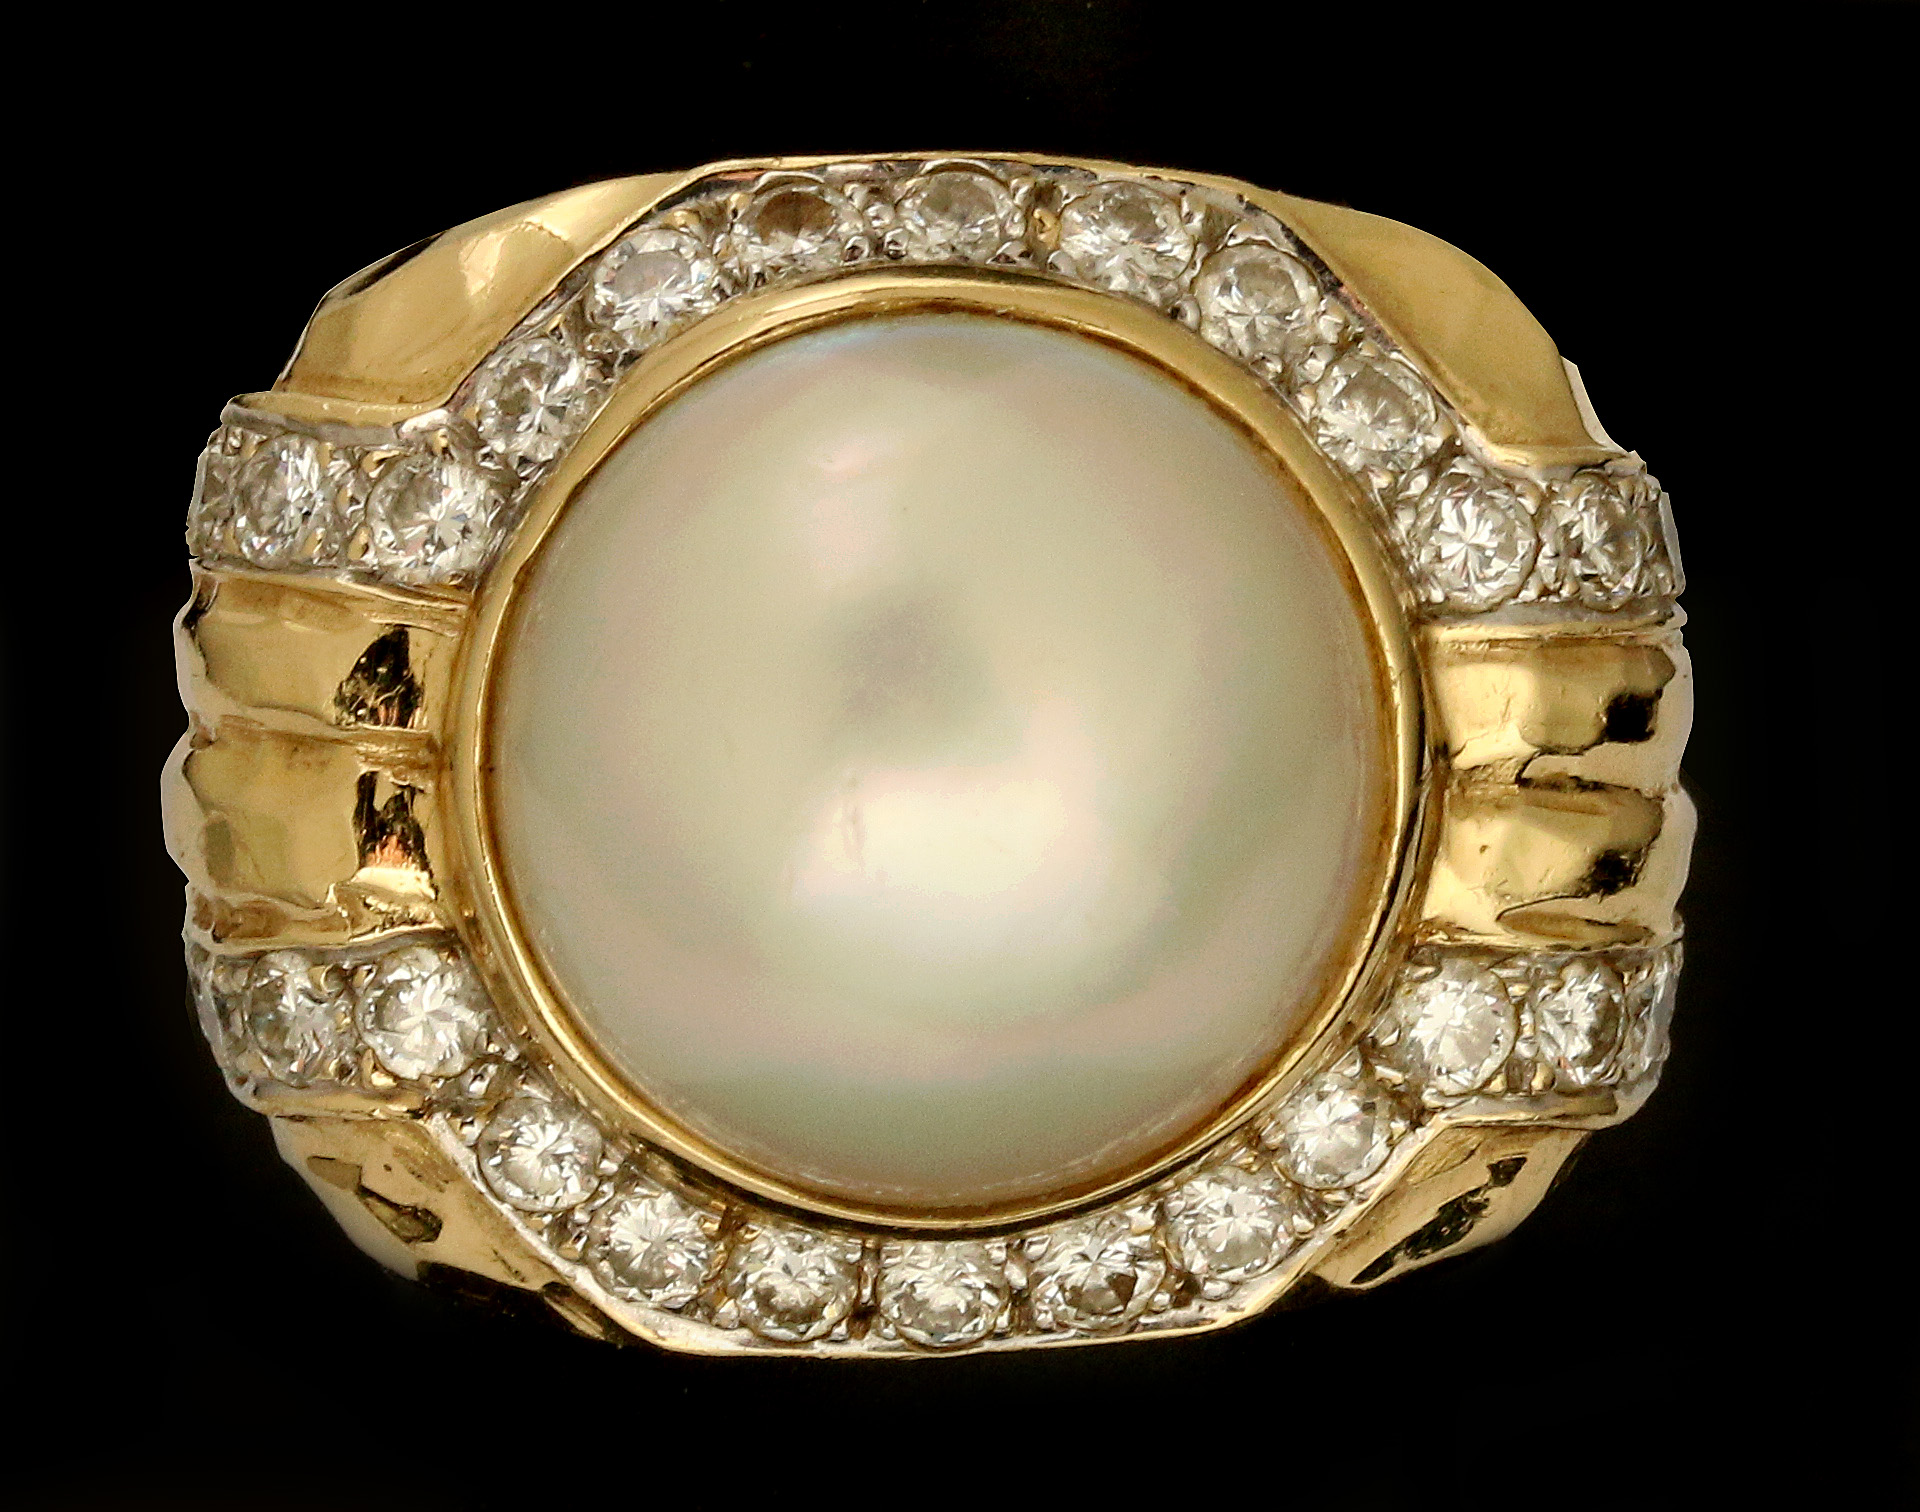 A GENT'S 14K MABE PEARL & DIAMOND RING SIGNED ROTK